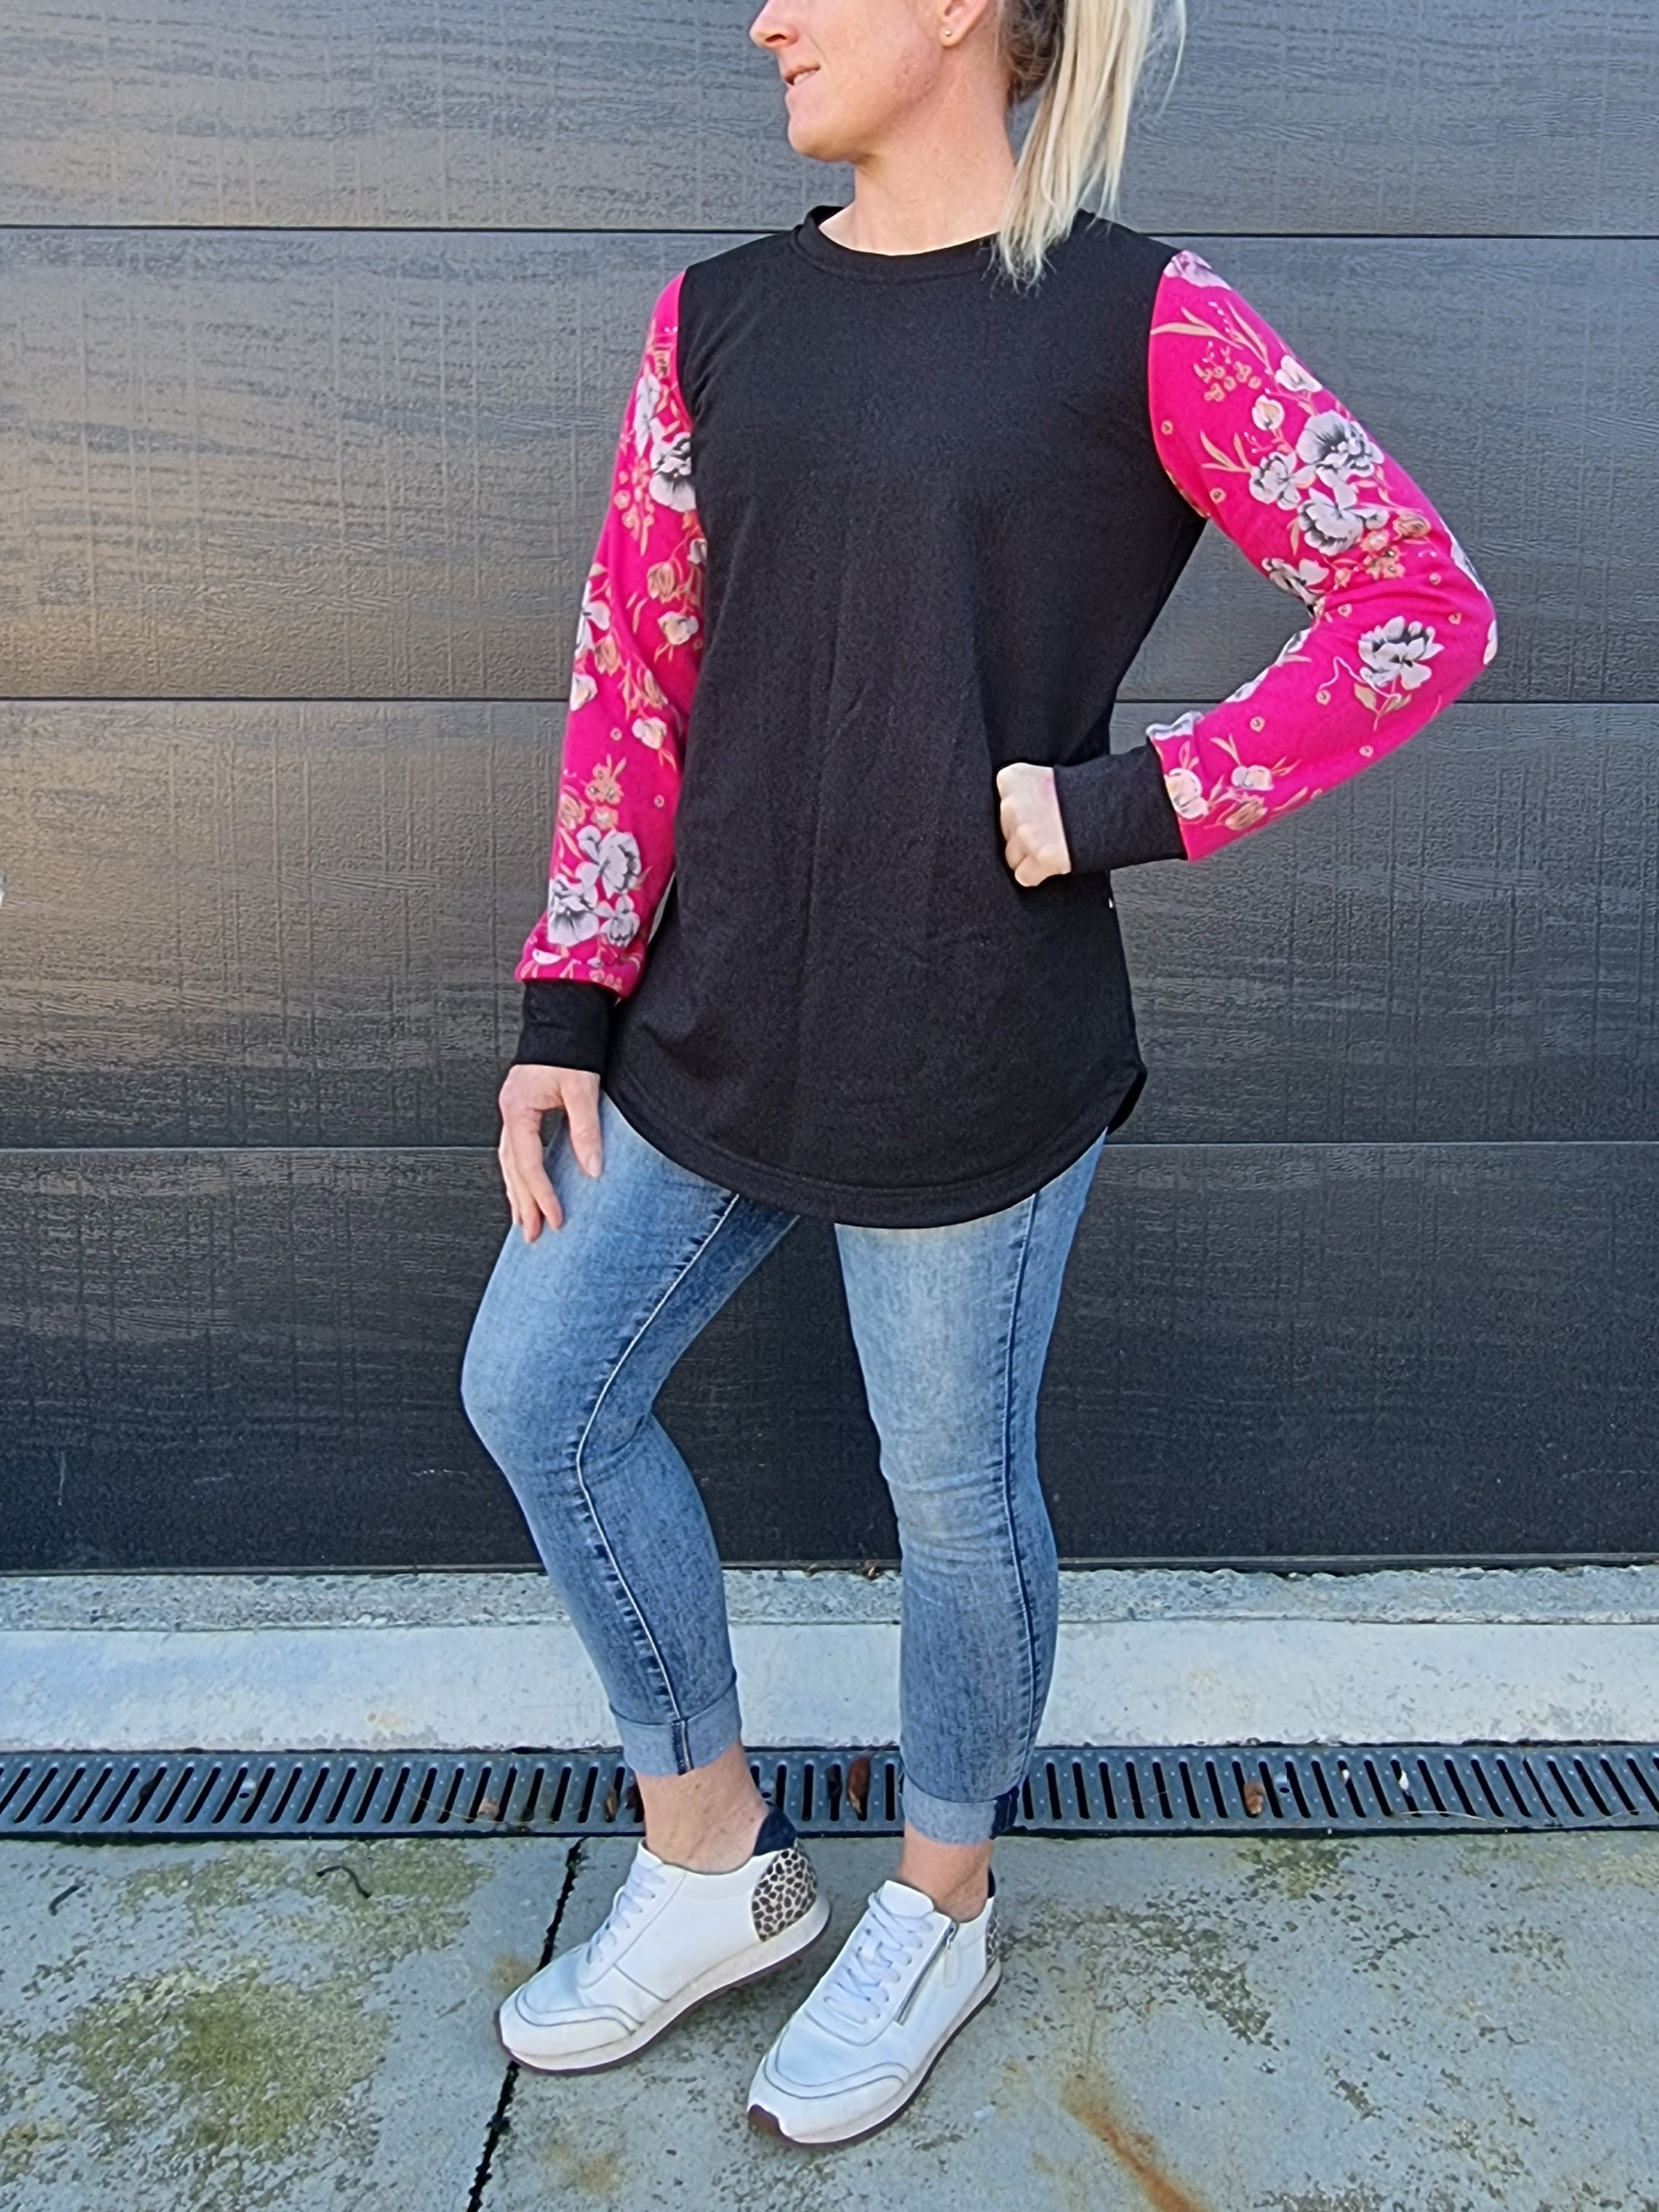 May sweat - Black/hot pink floral